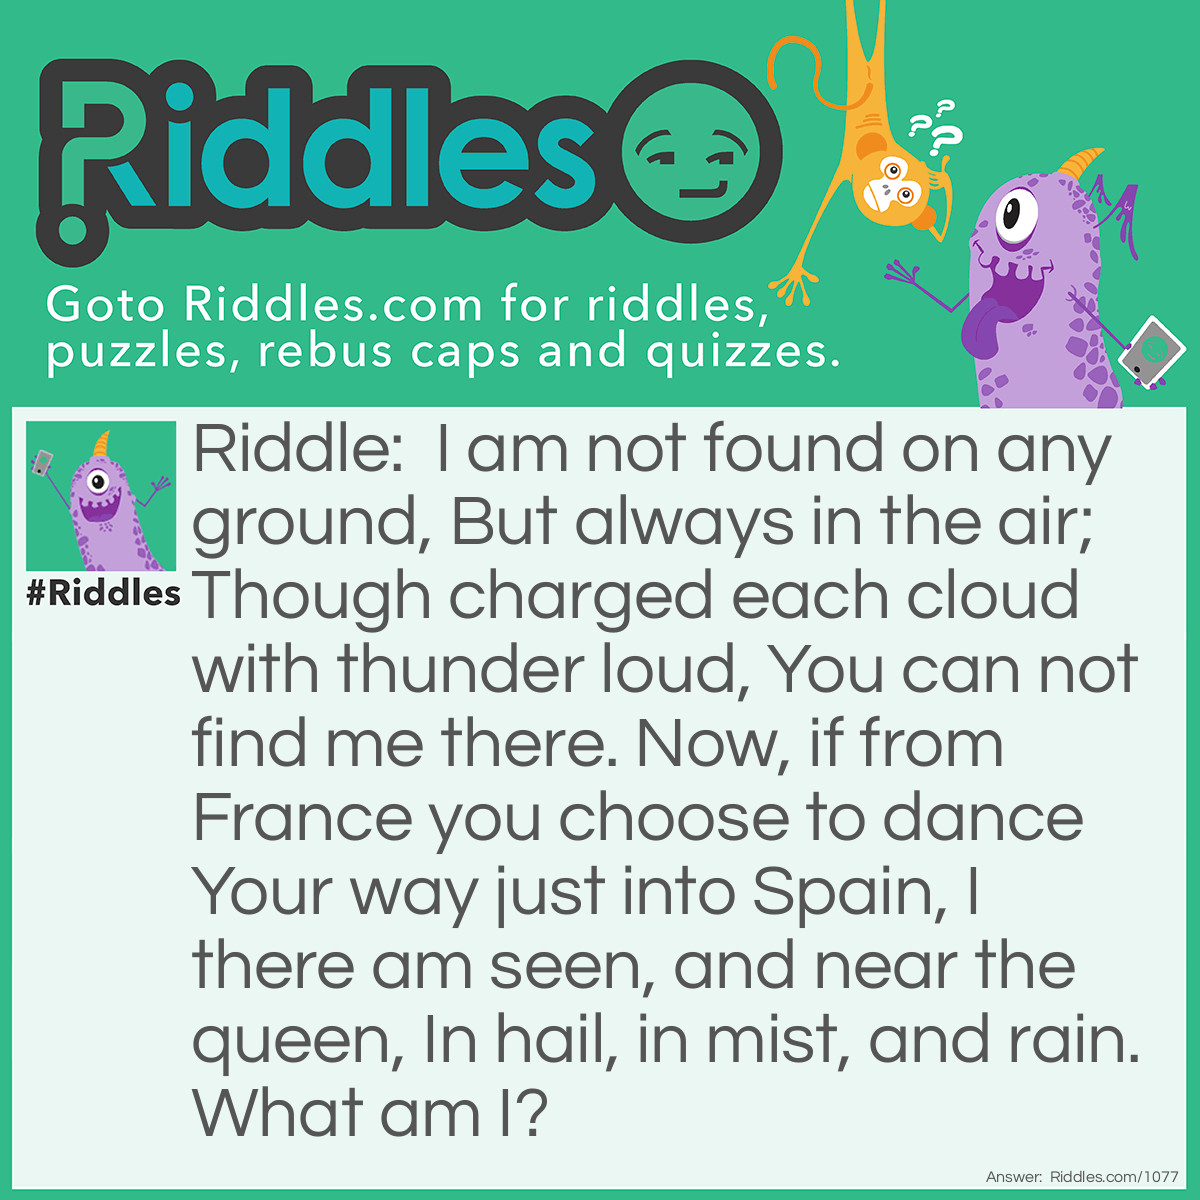 Riddle: I am not found on any ground, But always in the air; Though charged each cloud with thunder loud, You can not find me there. Now, if from France you choose to dance Your way just into Spain, I there am seen, and near the queen, In hail, in mist, and rain.
What am I? Answer: The letter I.